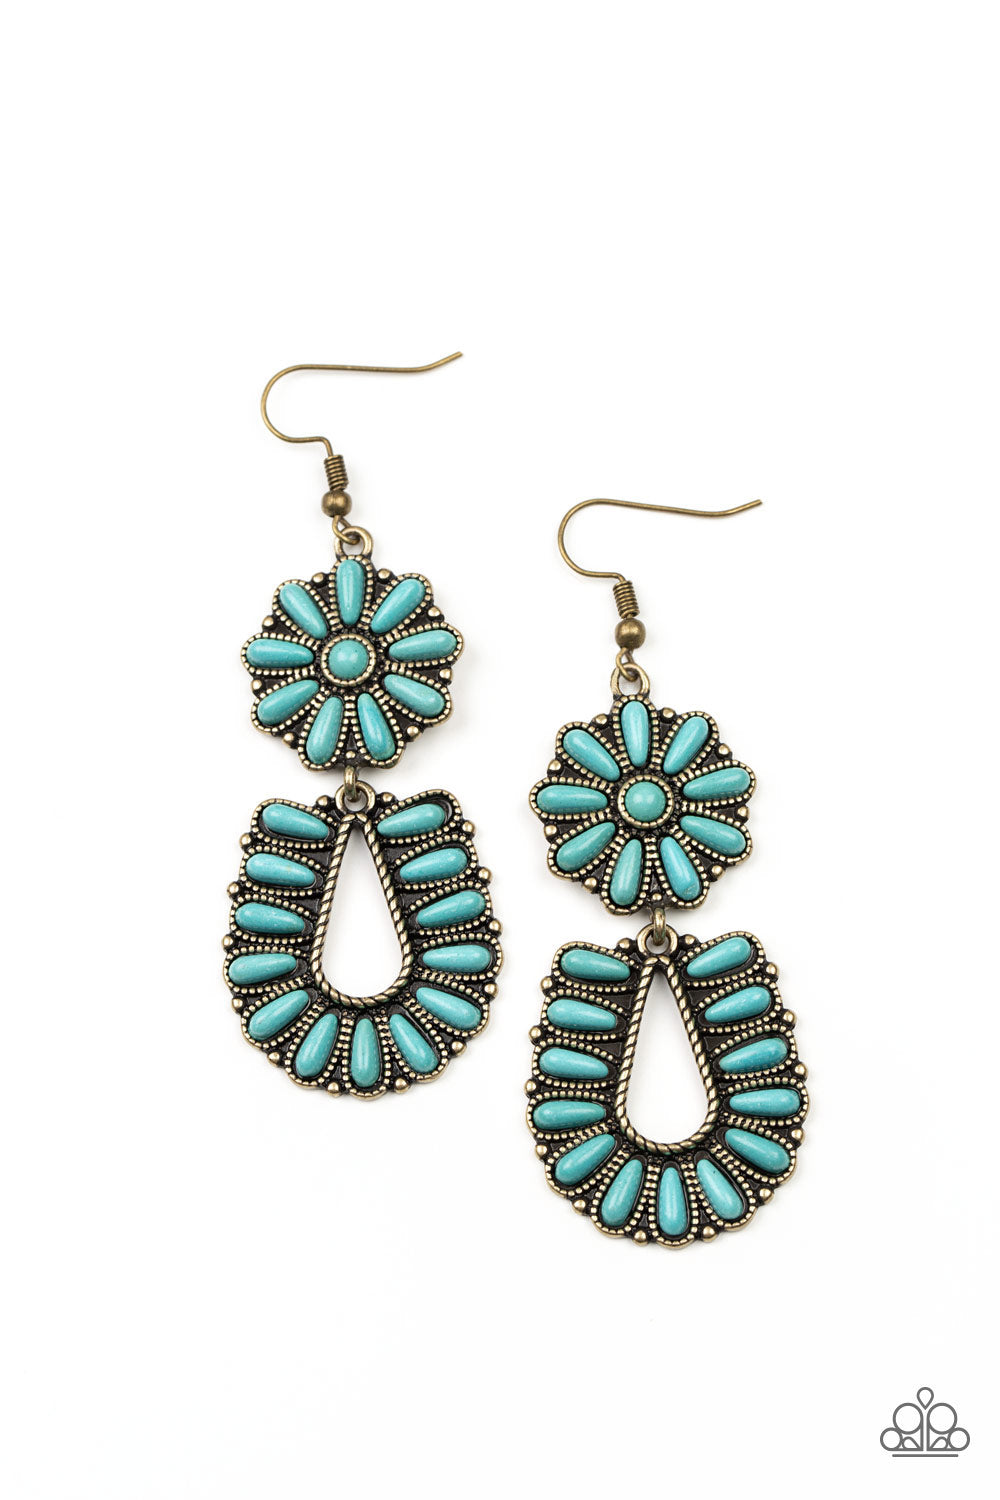 Paparazzi Badlands Eden Brass Earrings connect into a squash blossom Turquoise Blue Stone Earring